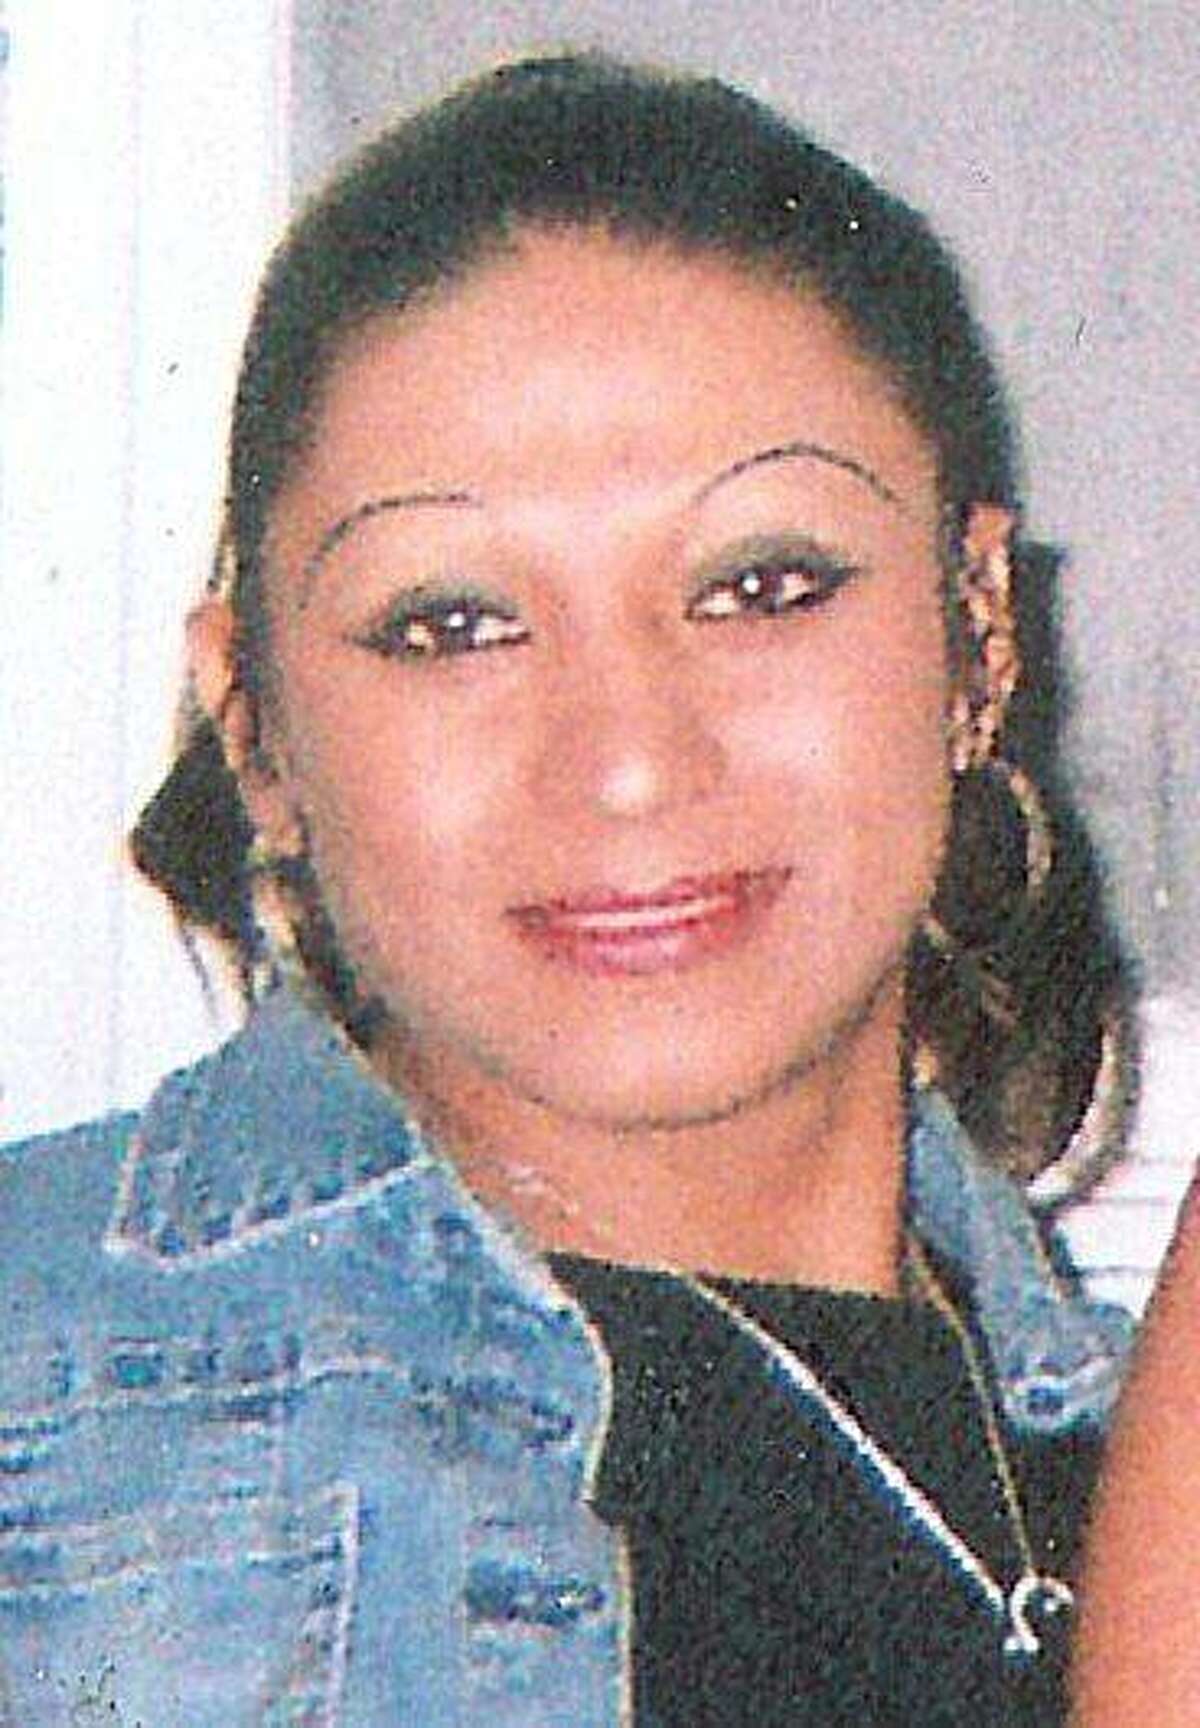 A Nicaraguan transgender, Ruby Ordenana, 27 years old, was murdered on Friday, March 16, 2007. Her body was found on the corner of Cesar Chavez and Indiana Streets in the Mission District of San Francisco.